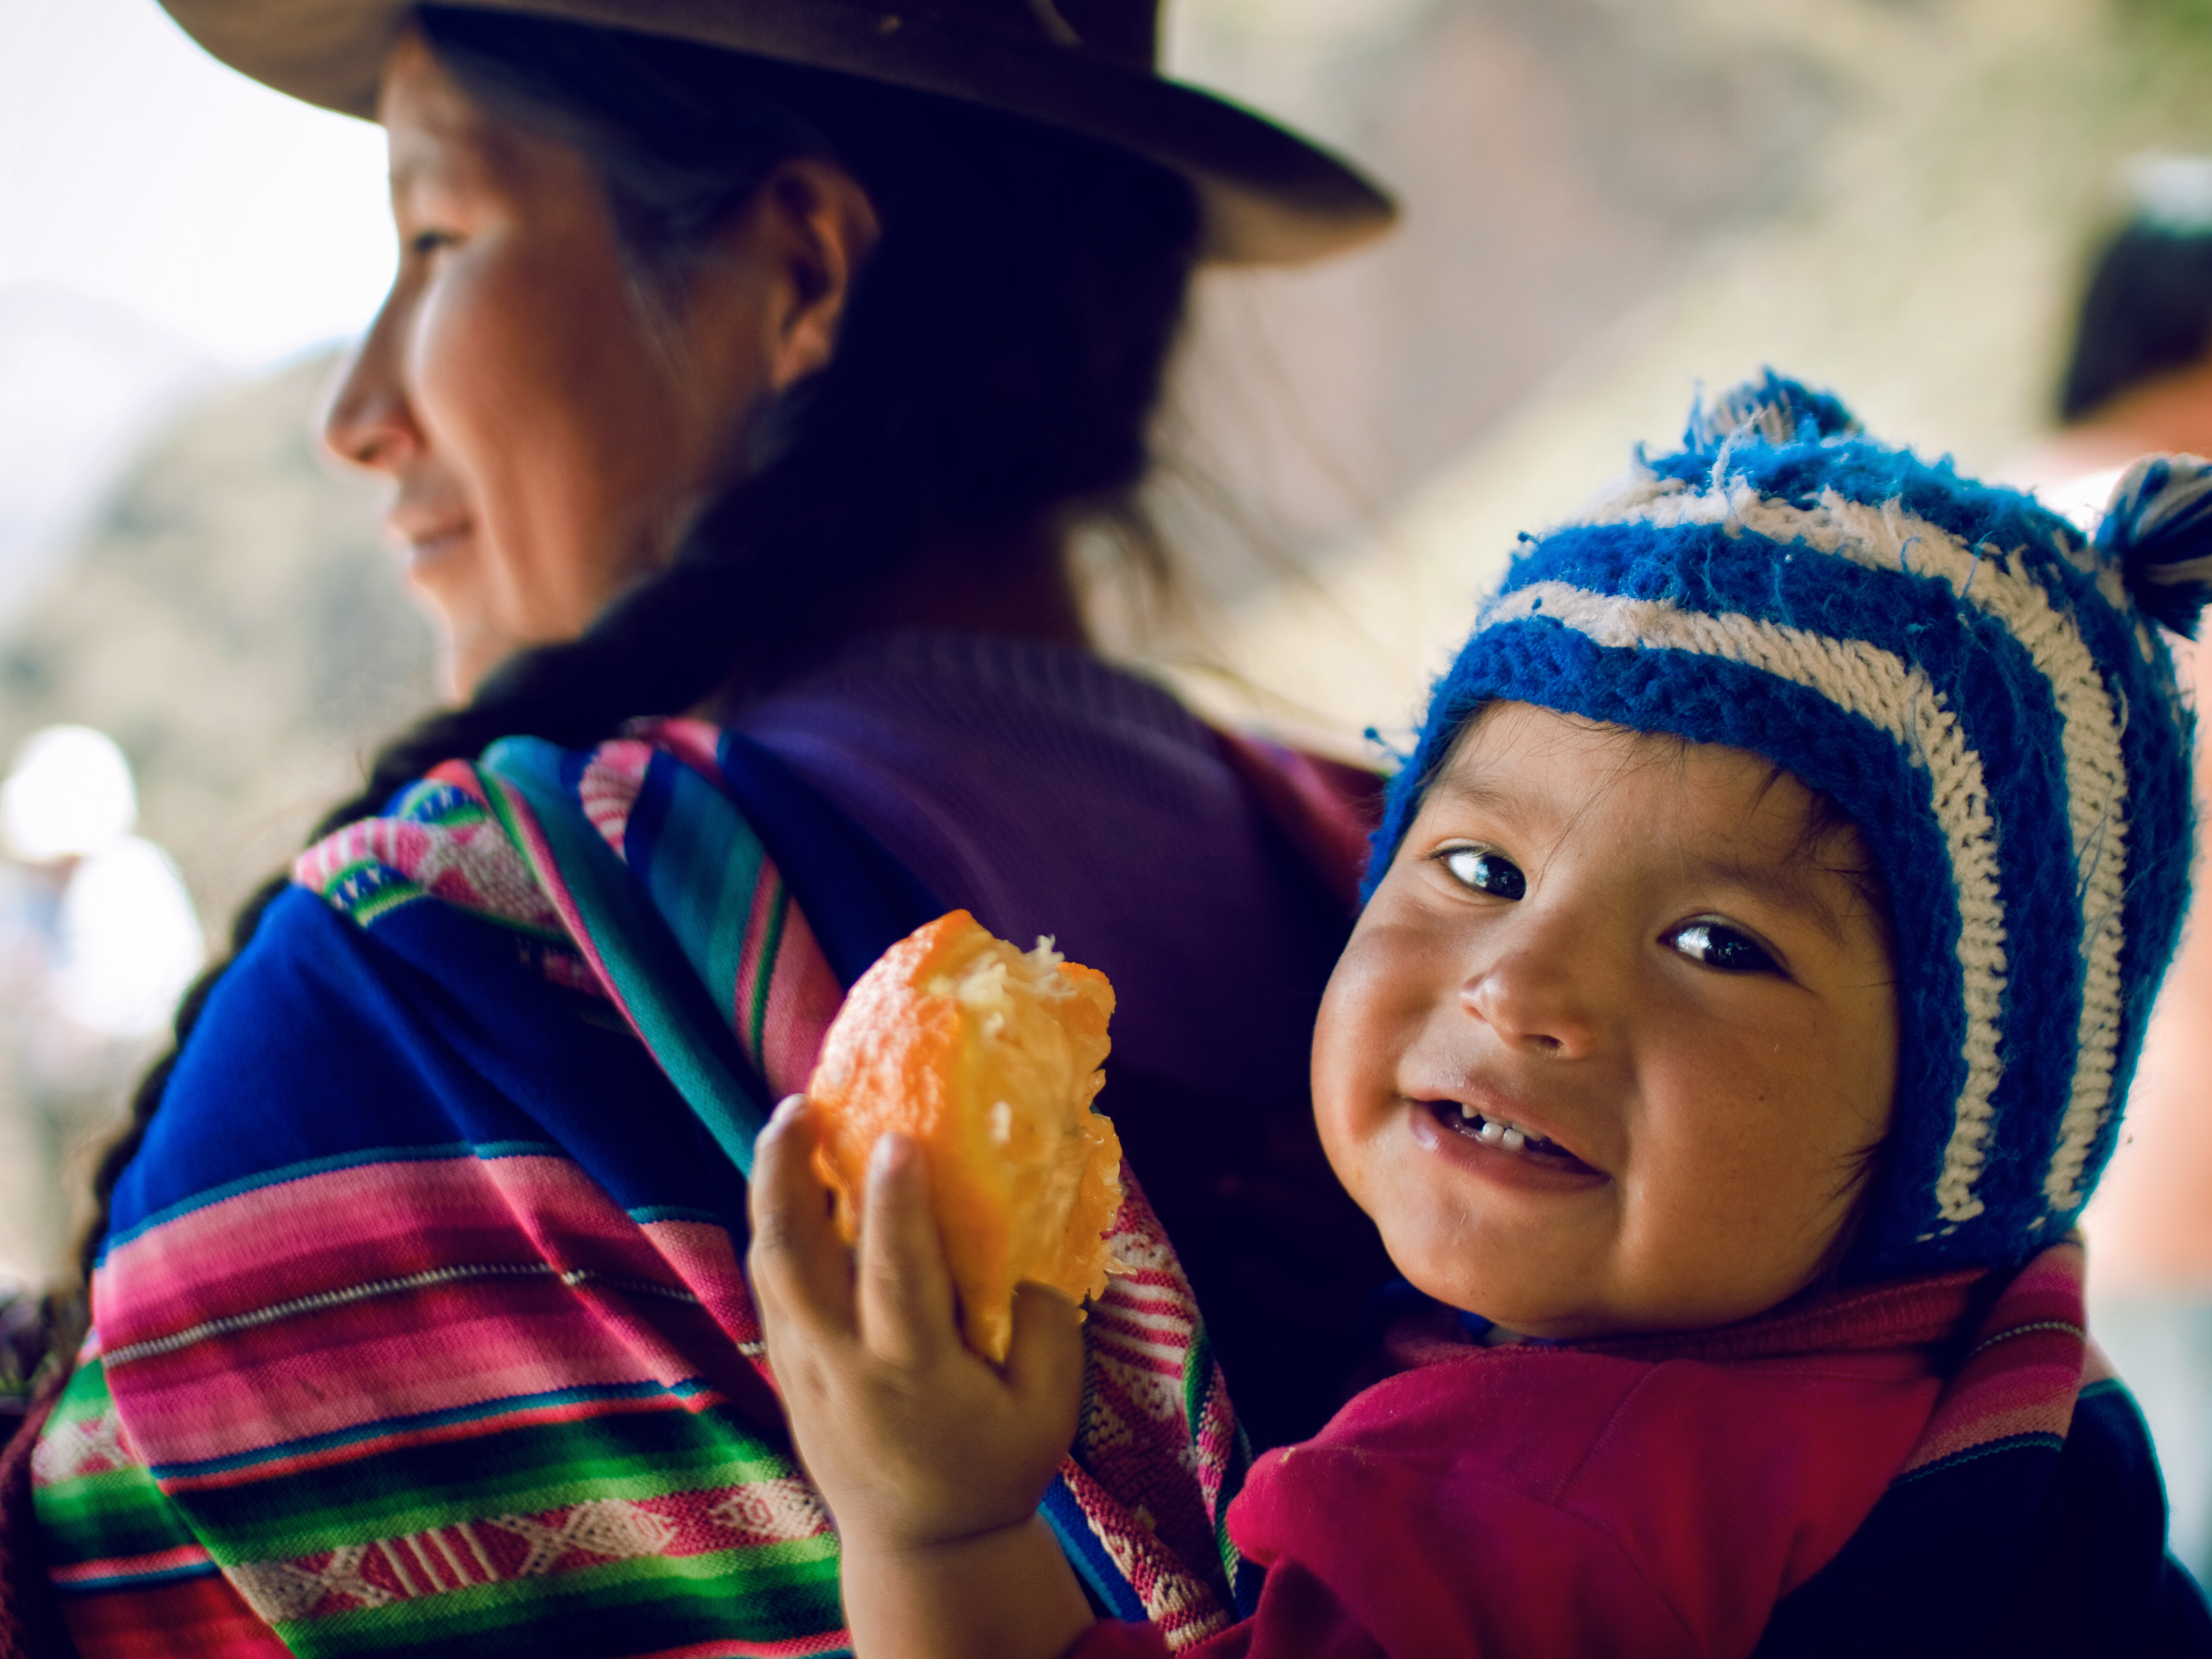 A children and her mother, wearing typical Andean wool dresses and hats, nearby the ruins of P?sac, Valle de los Incas, Peru (Thomas Cristofoletti—FlickrVision)